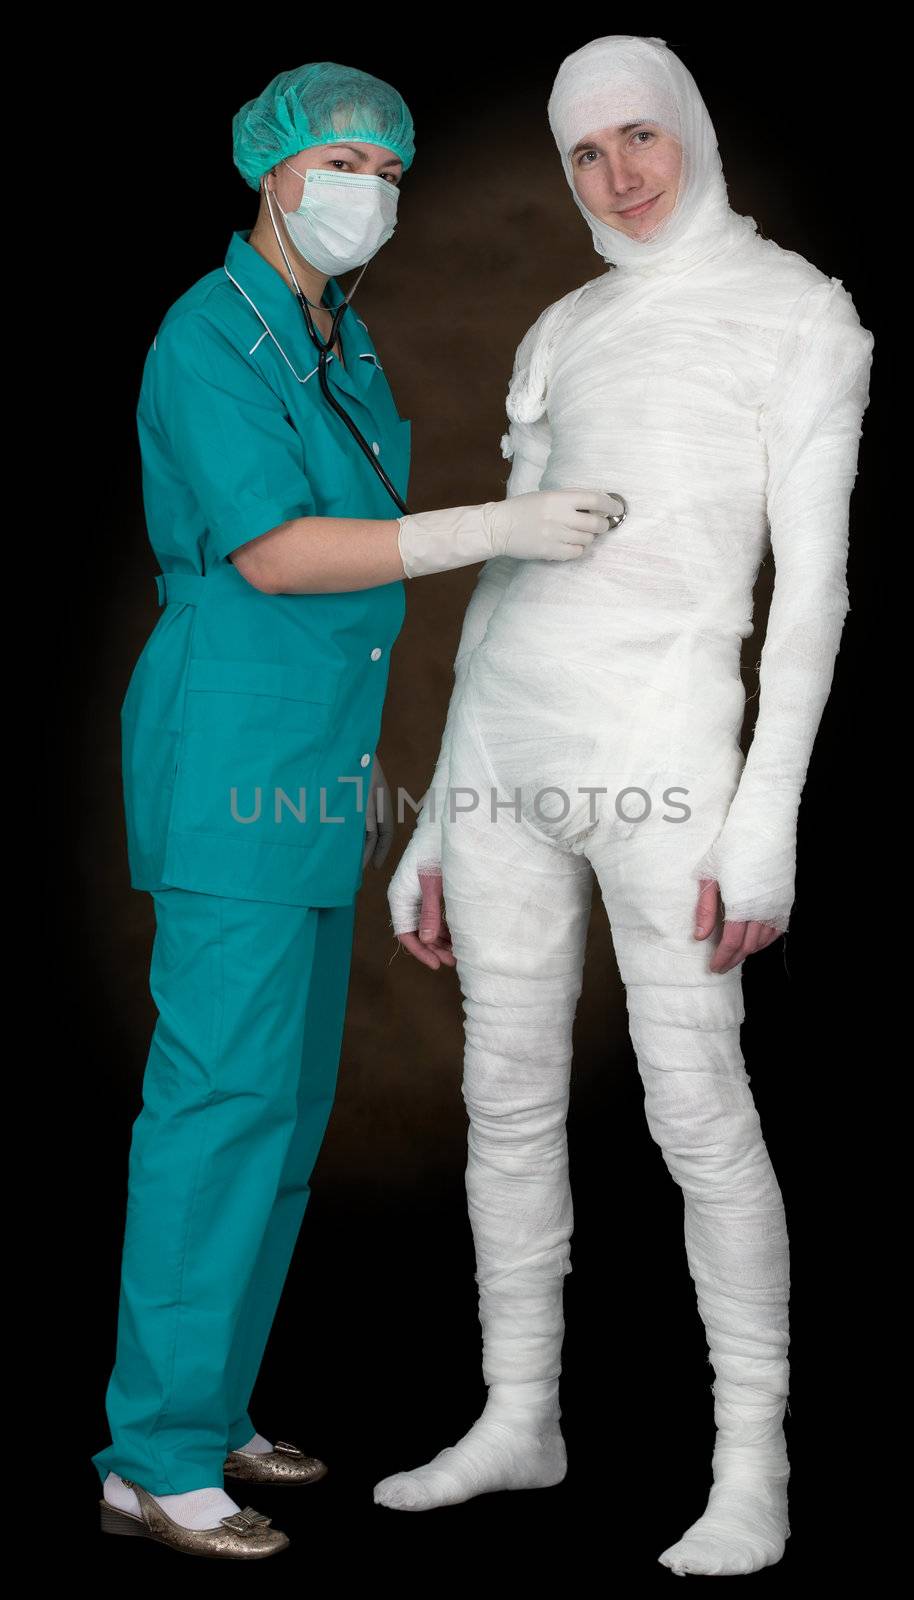 Man in bandage and nurse with stethoscope by pzaxe